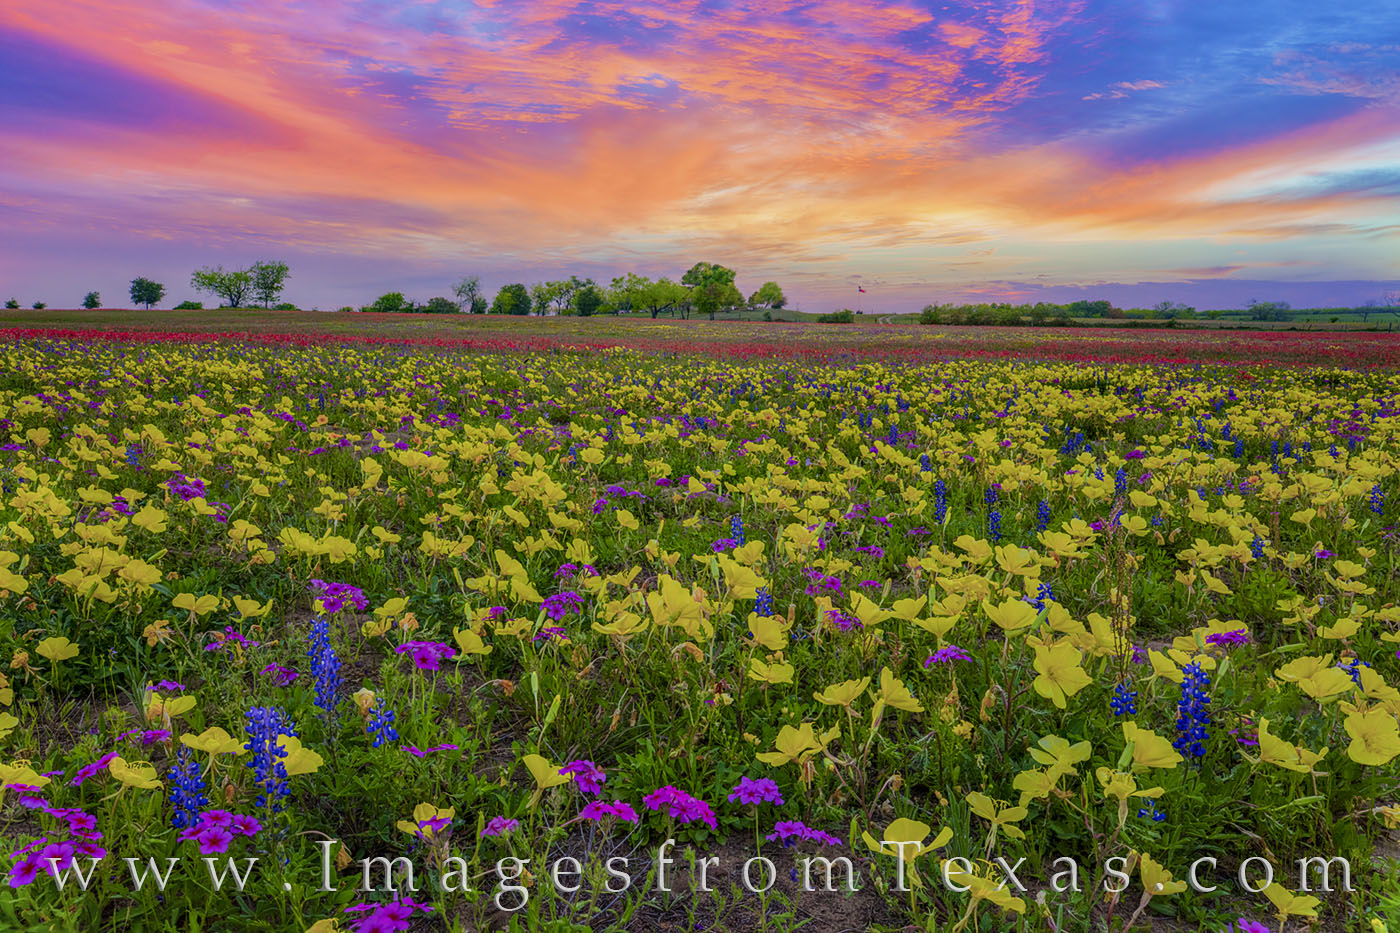 A sea of color seemed to stretch to the horizon in this wildflower photograph from New Berlin, Texas. I hadn’t visited or photographed...